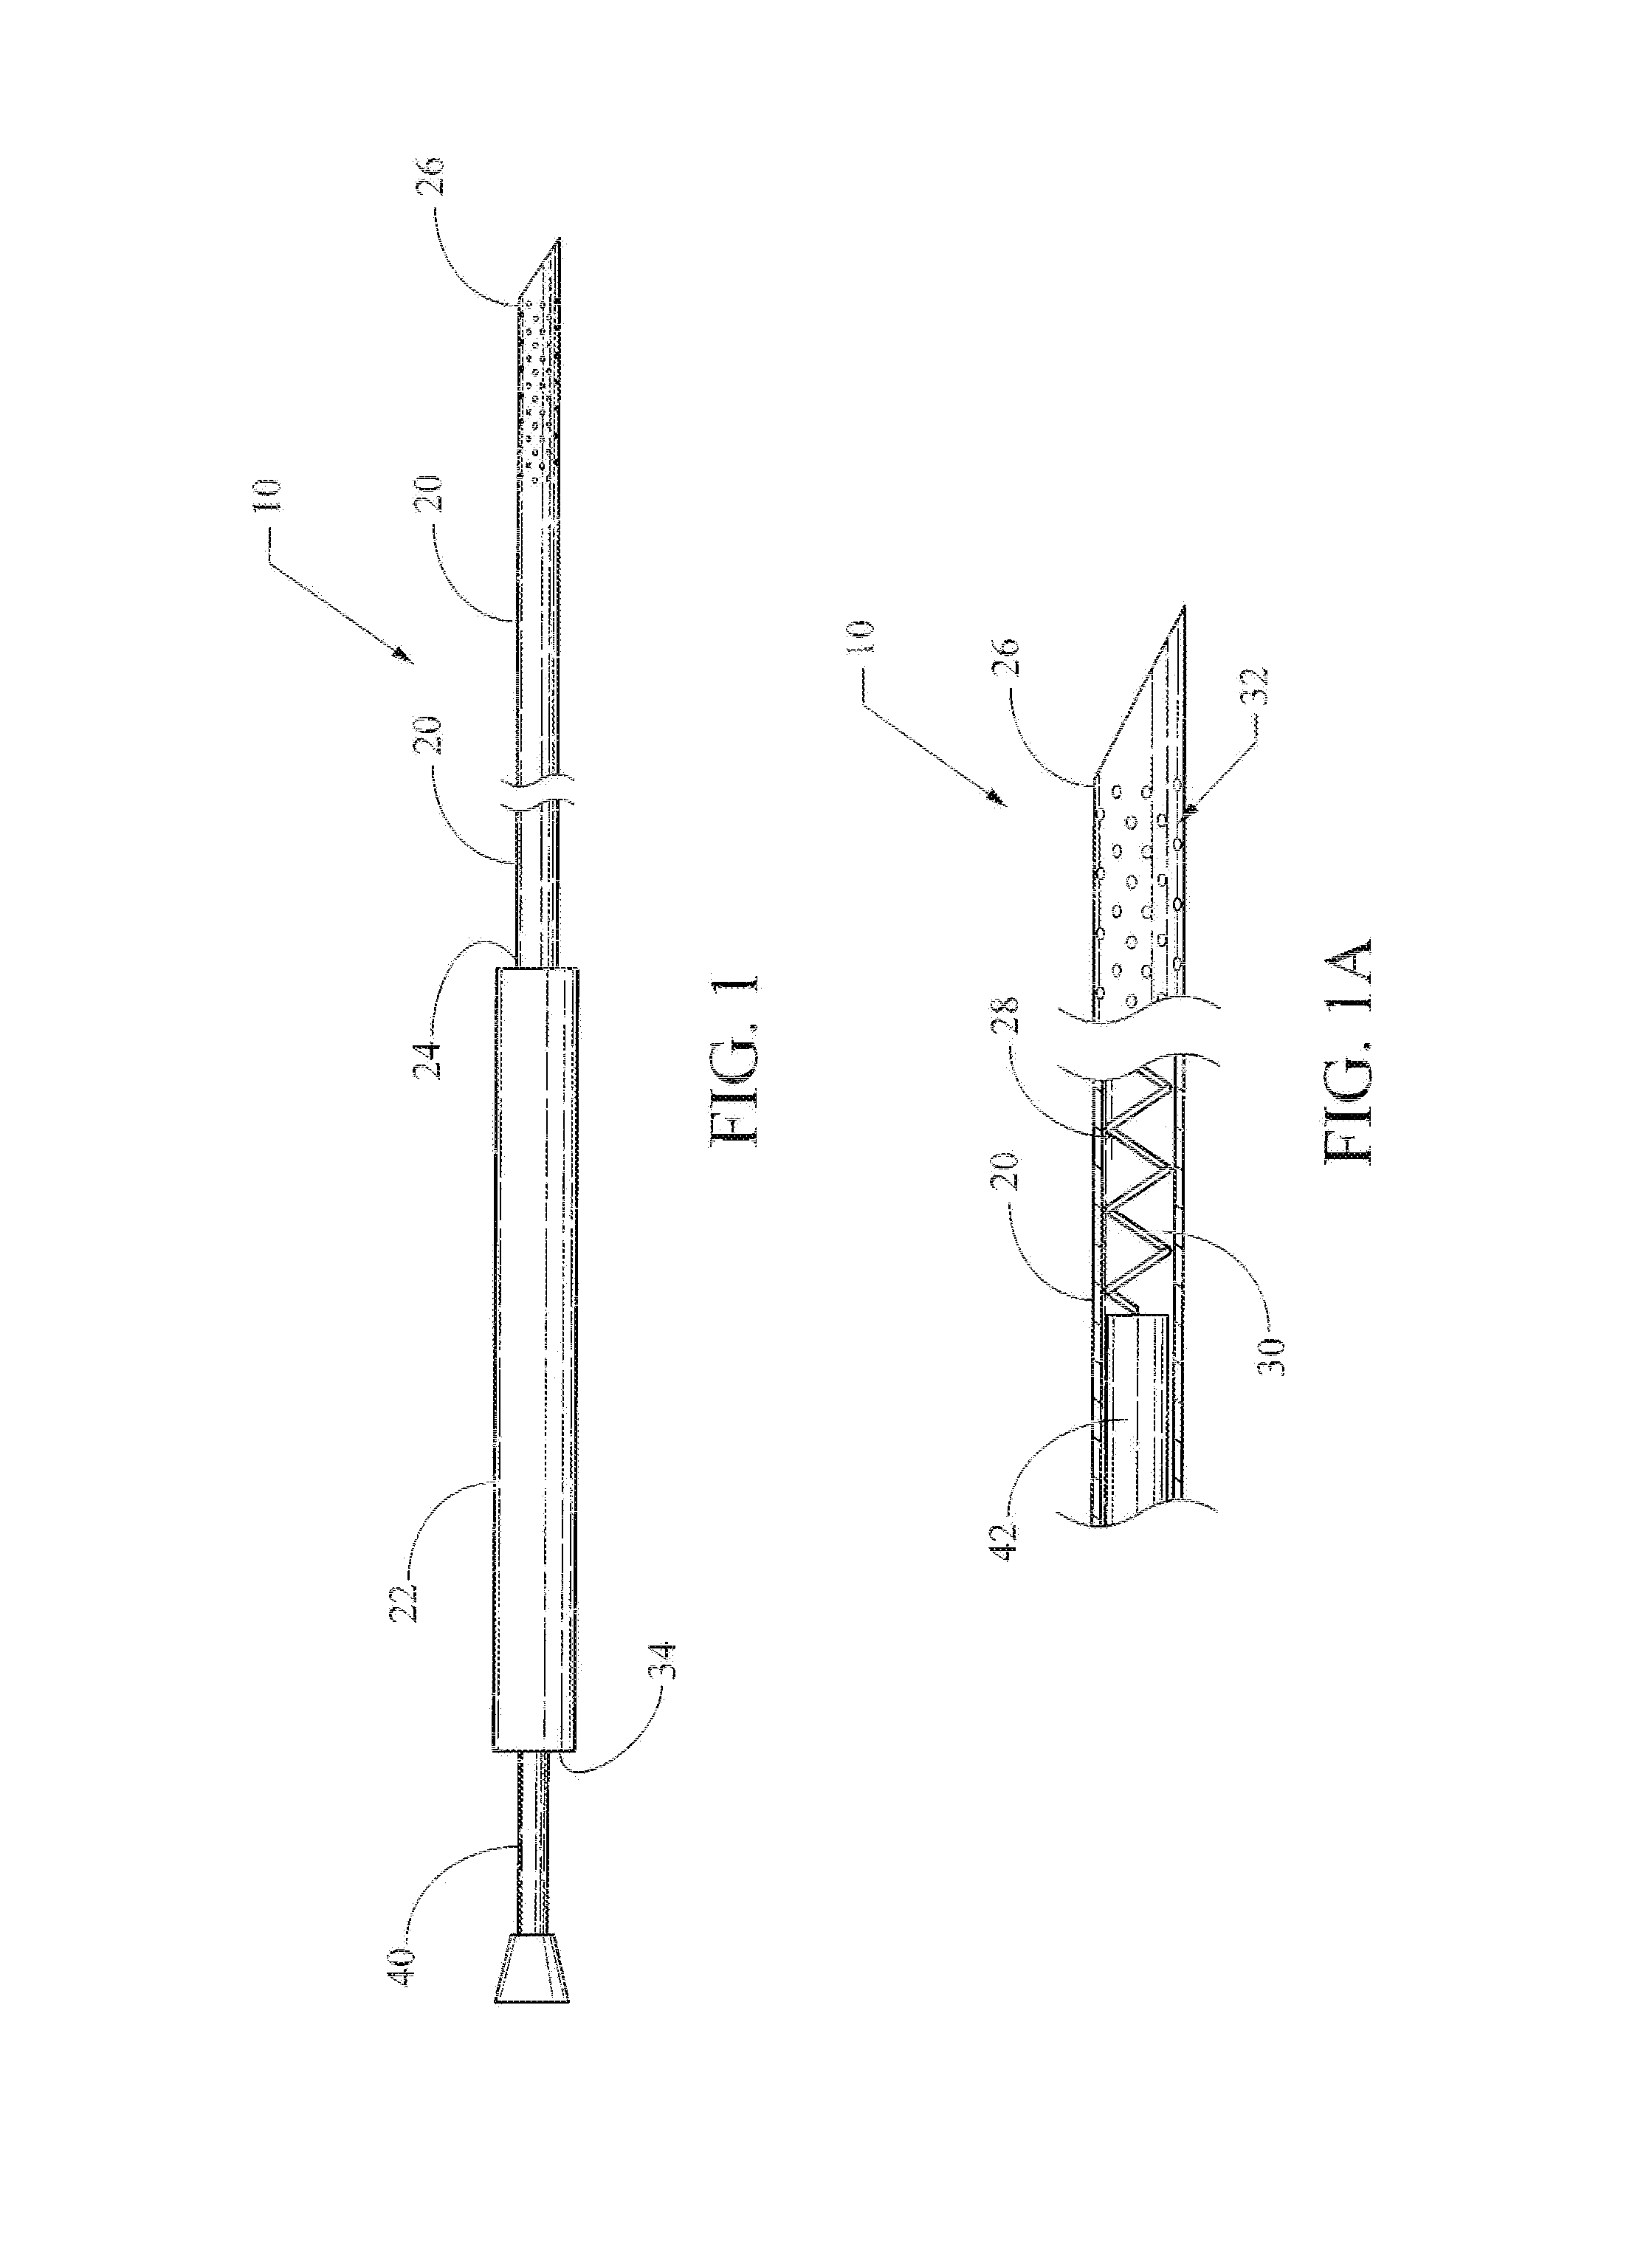 Embolization coil delivery systems and methods